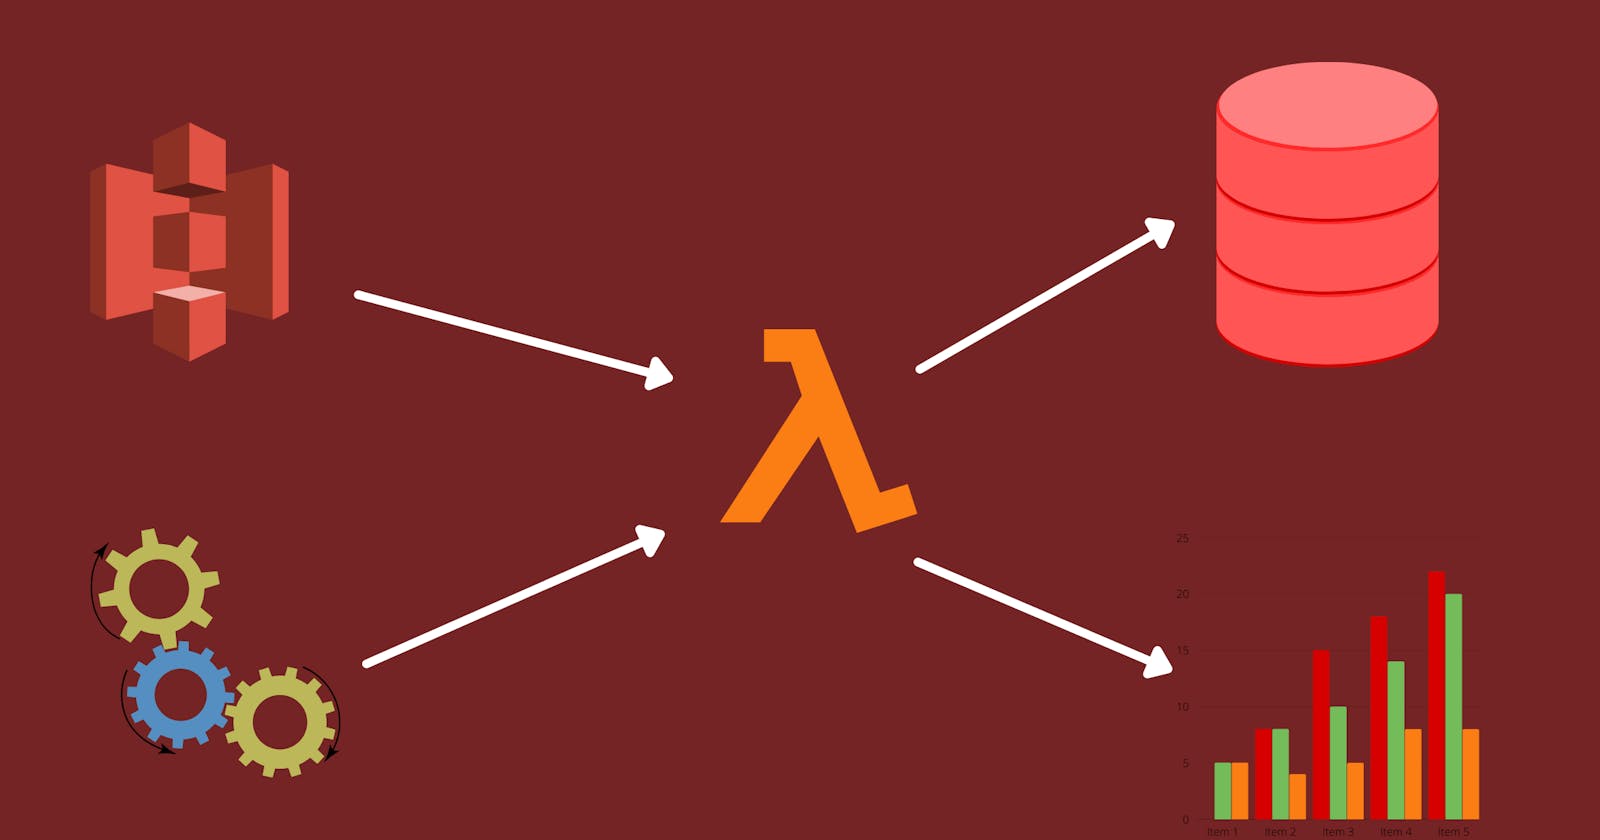 AWS Lambda for beginners - A visual guide